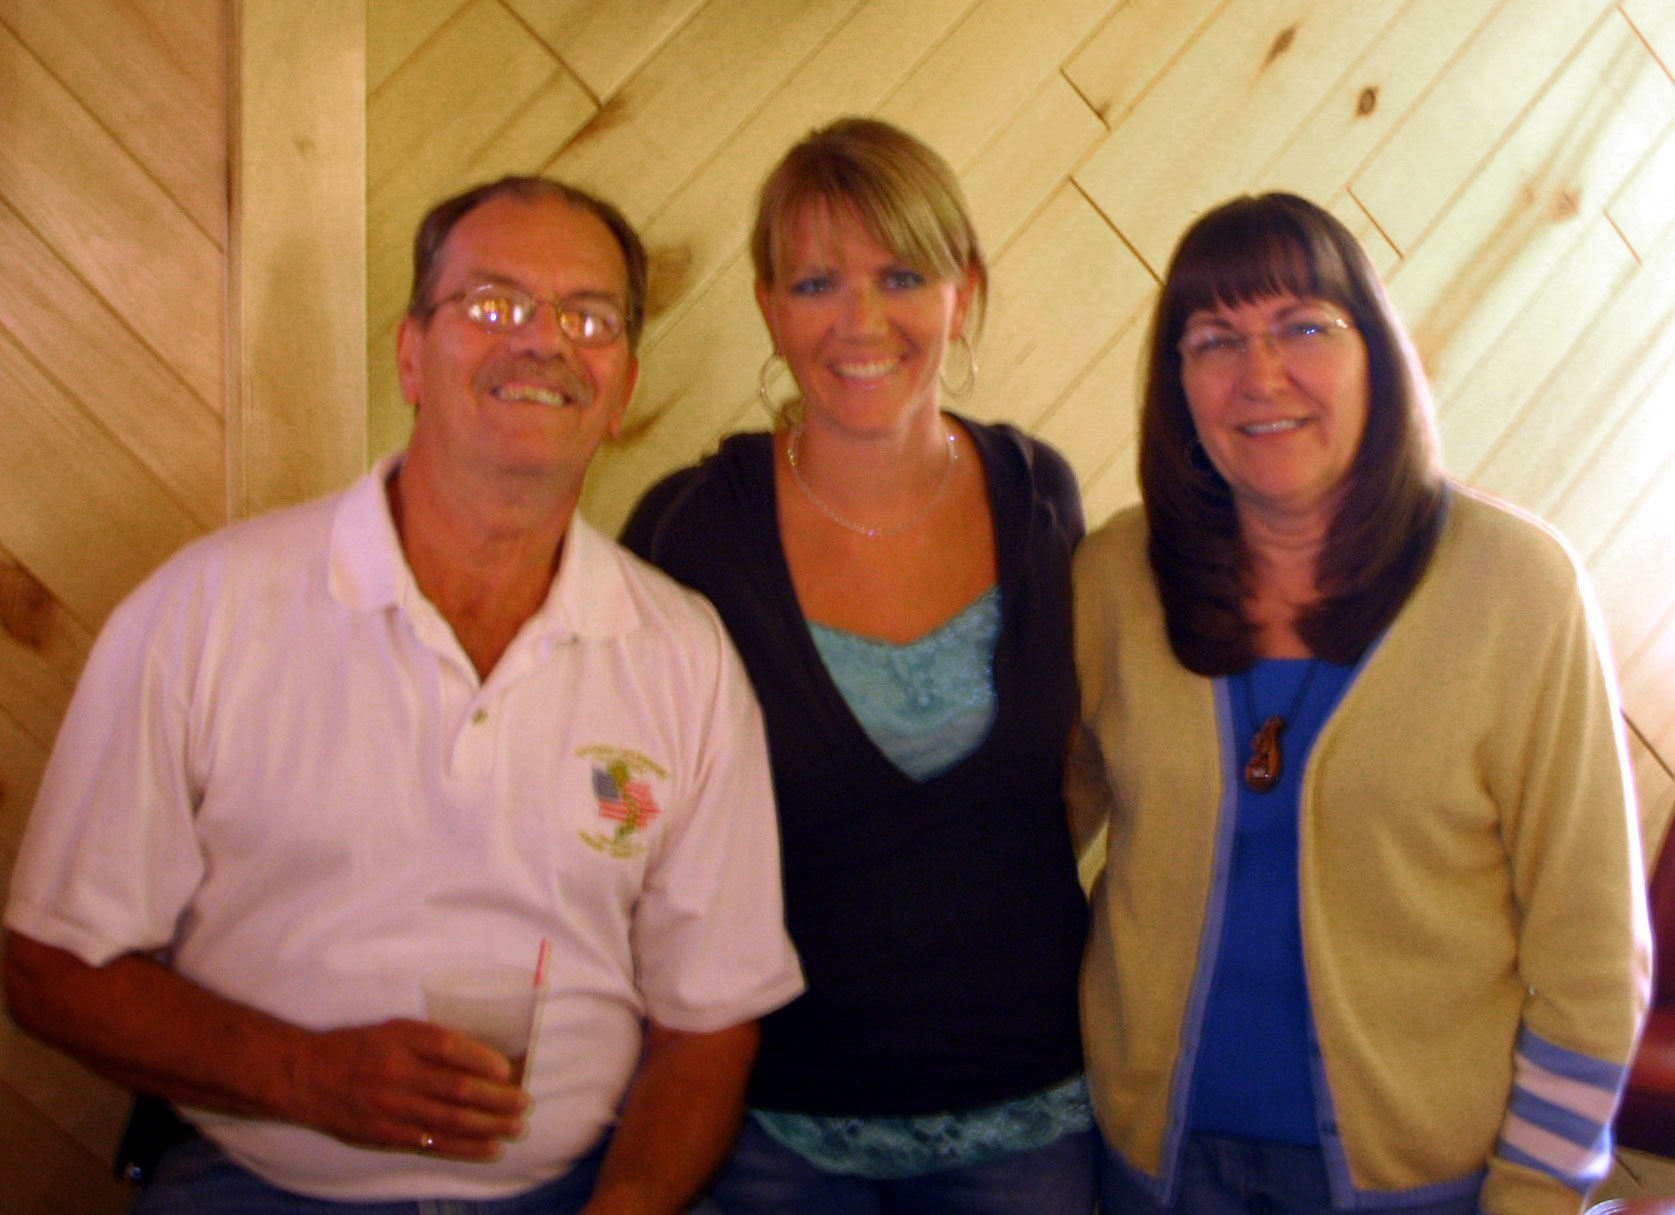 (L-R)Ron, daughter Jess and Lou Ann Dirks from Des Moines Iowa, July 16-19, 2009